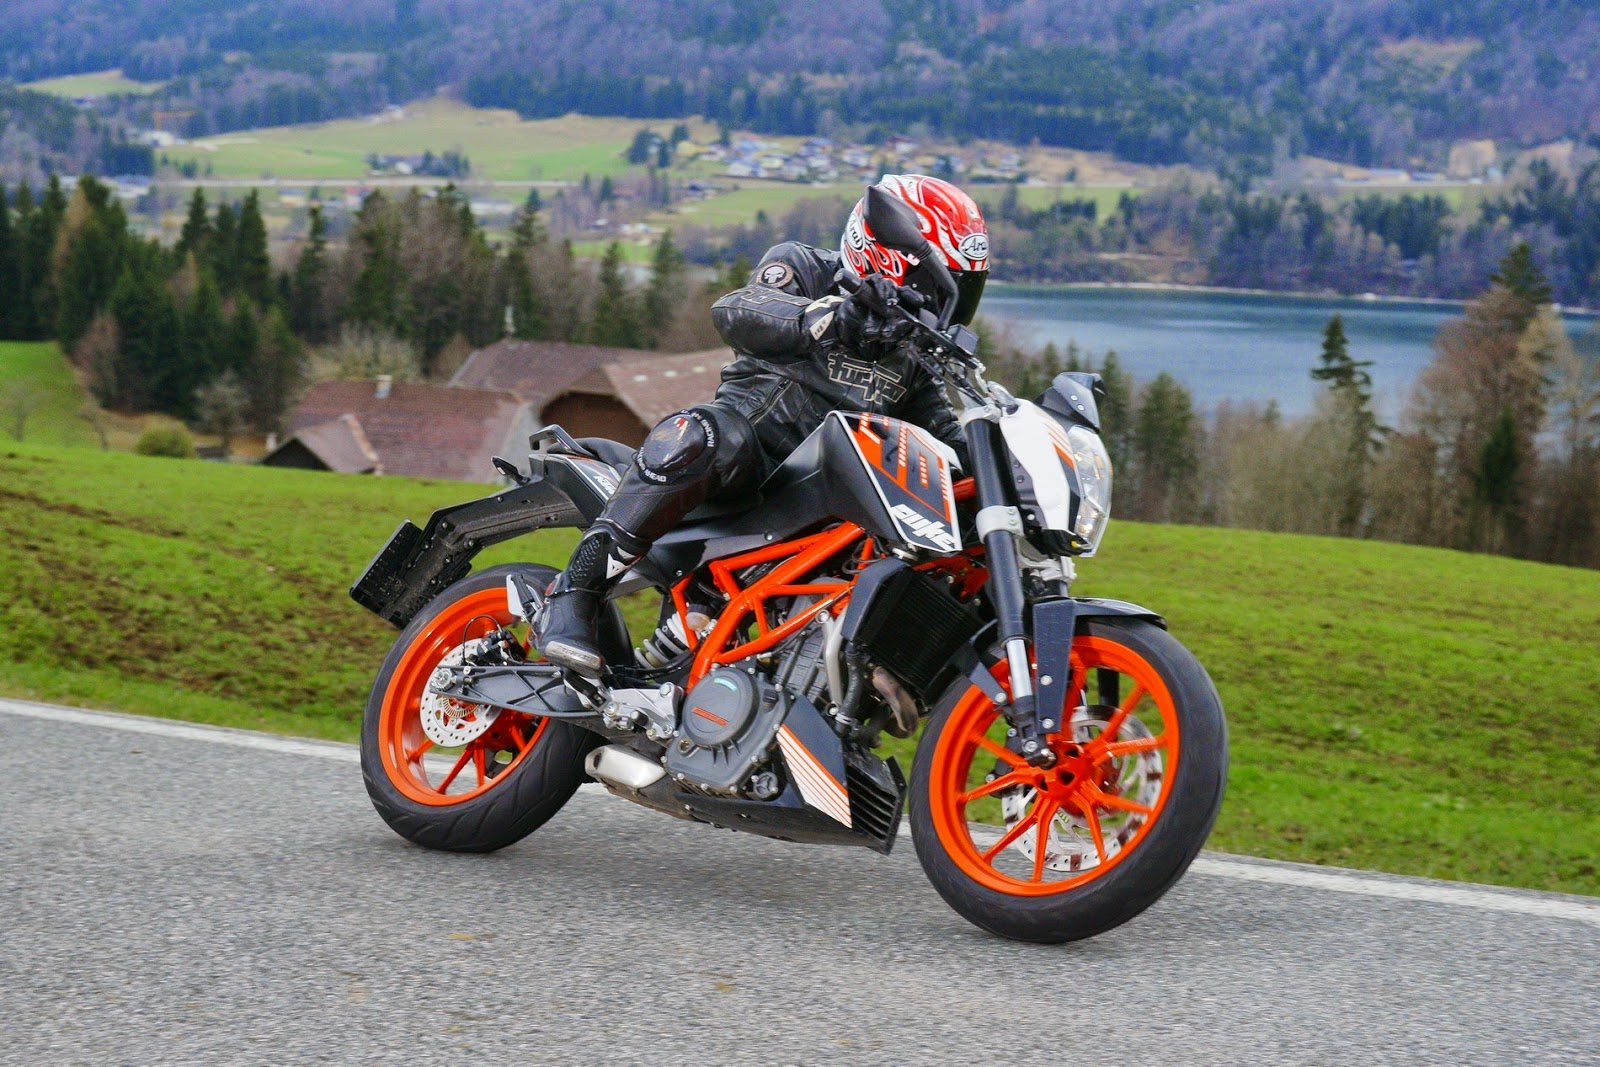 New Motorcycle: KTM Duke 390 USA Price, Review and Specs